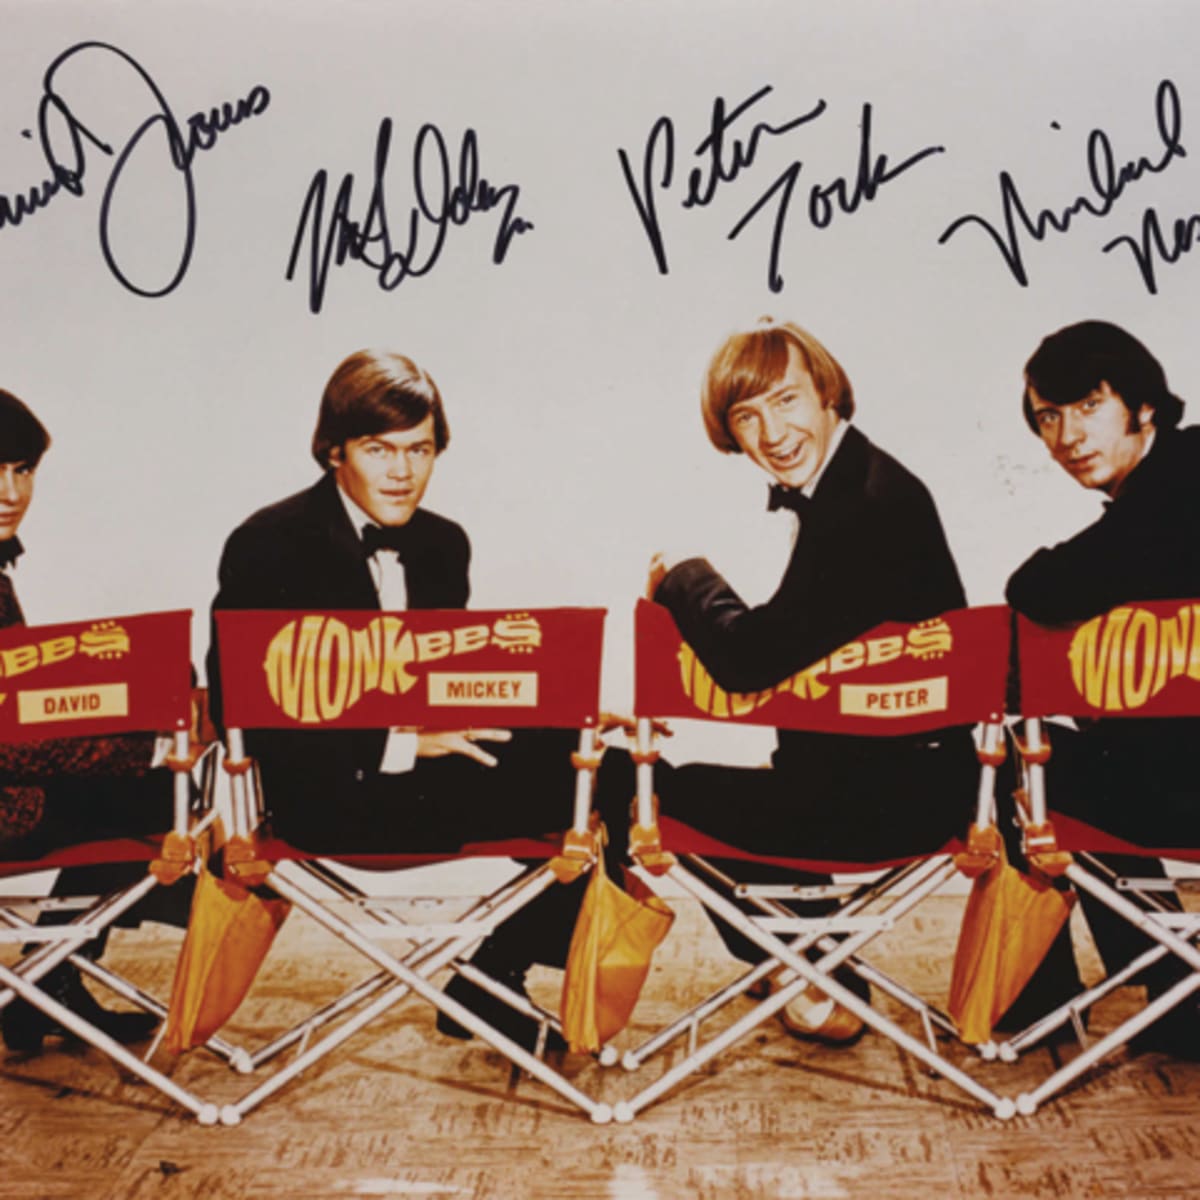 The Monkees 8x10 Glossy Photo 